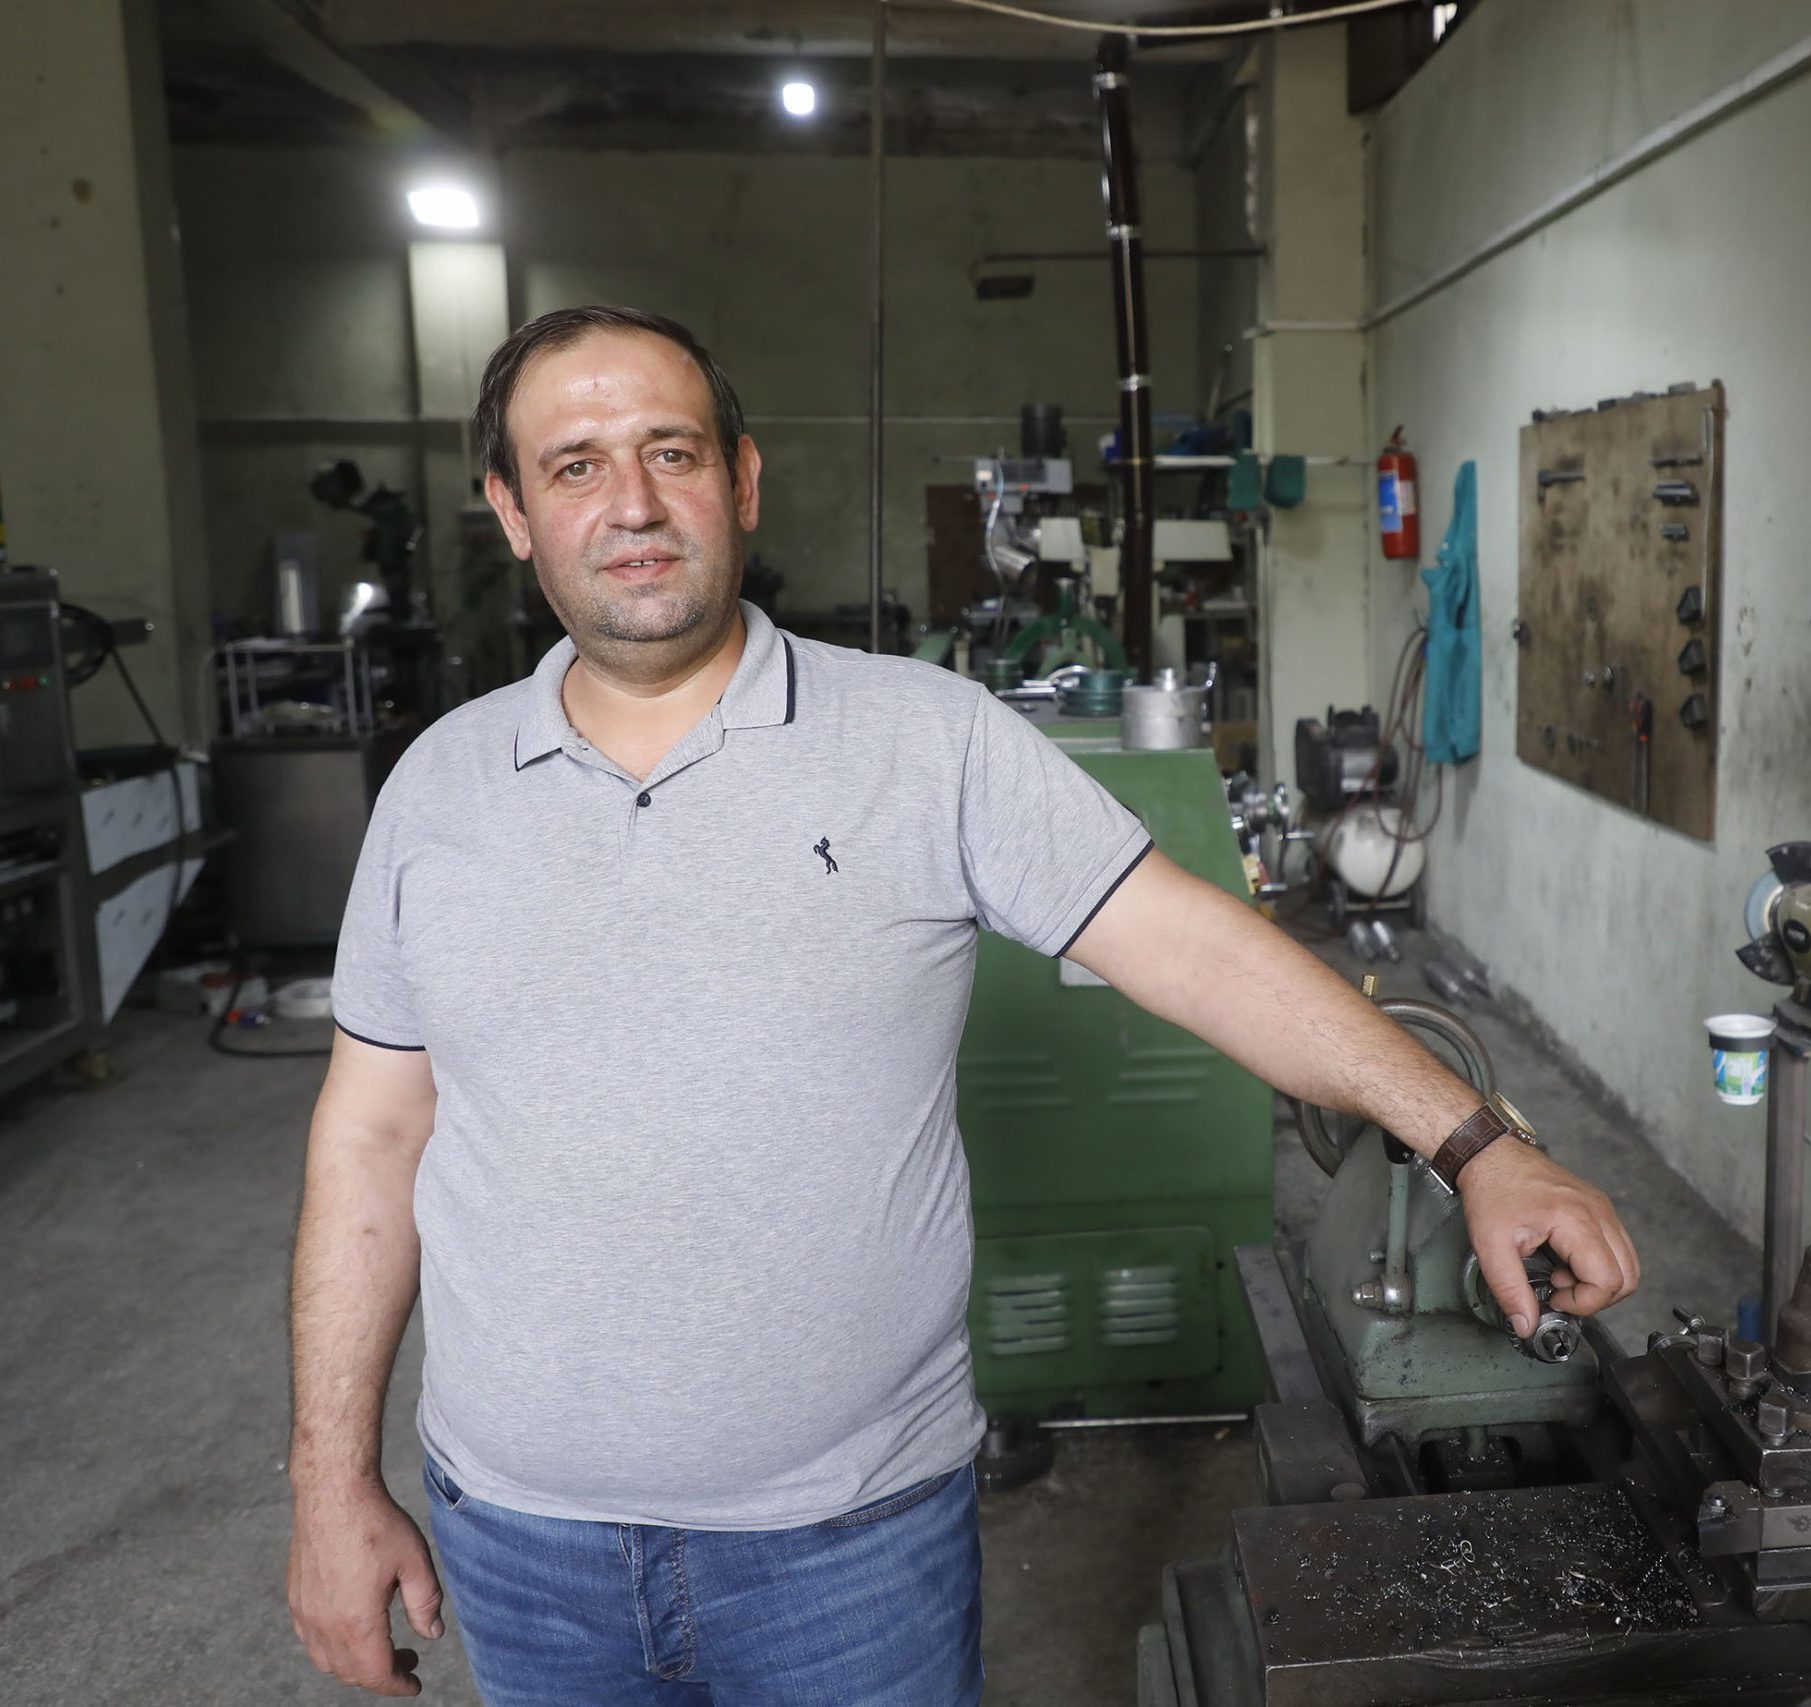 Syrian Business Owner Finds Success After Tragedy